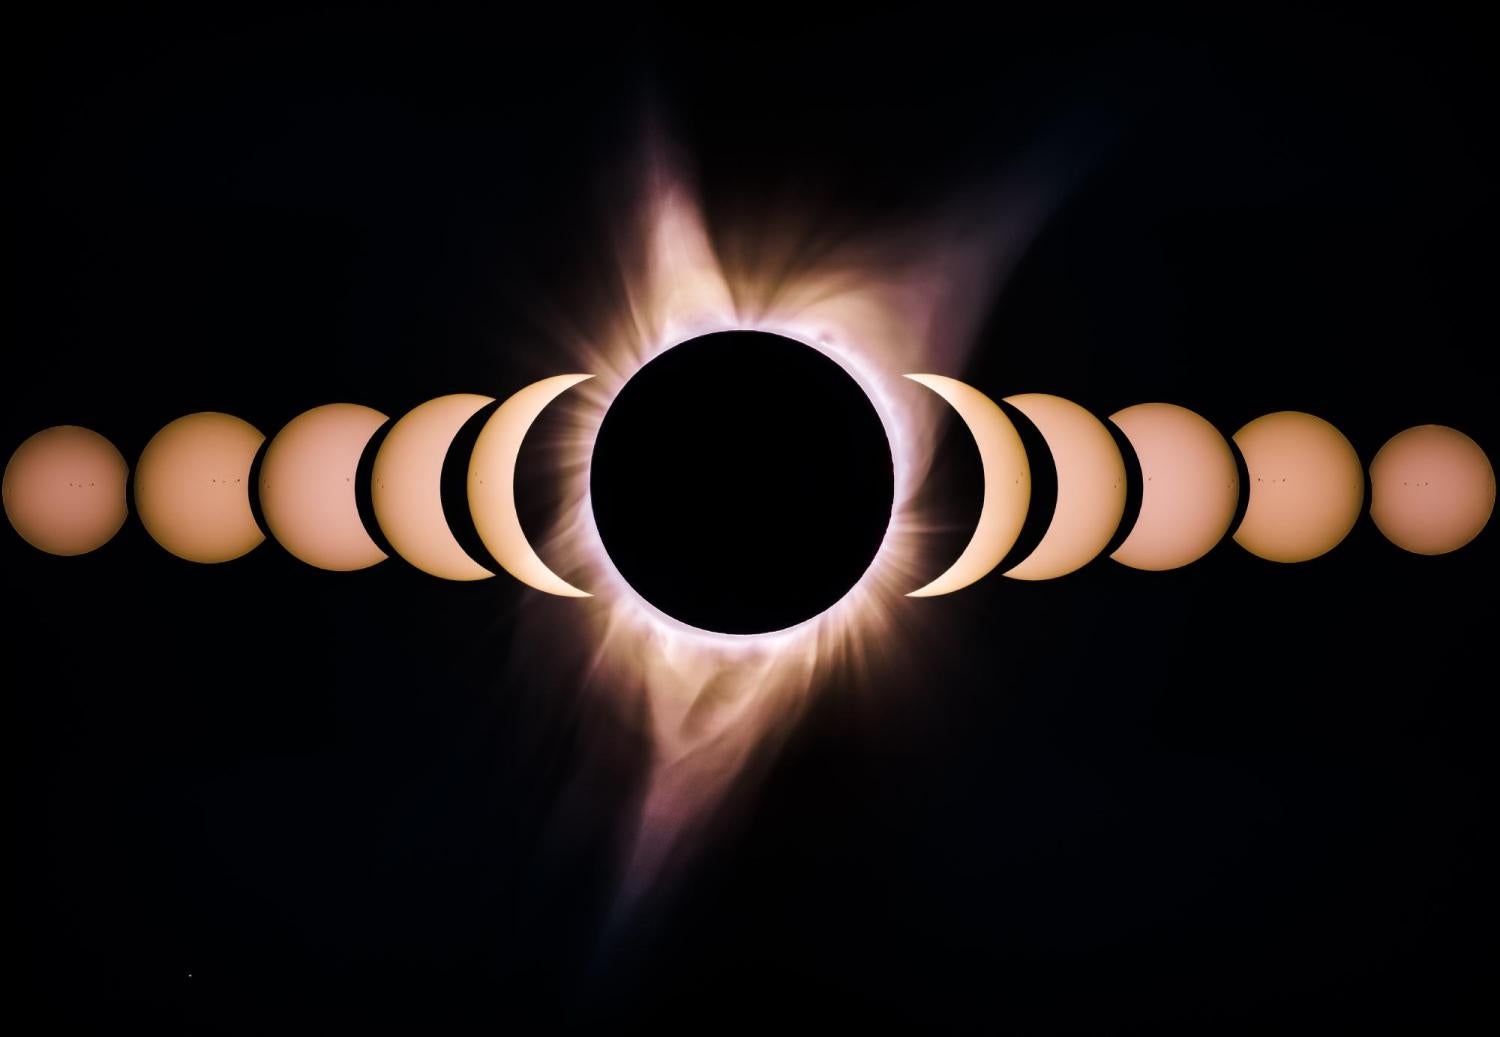 time lapse of eclipse 